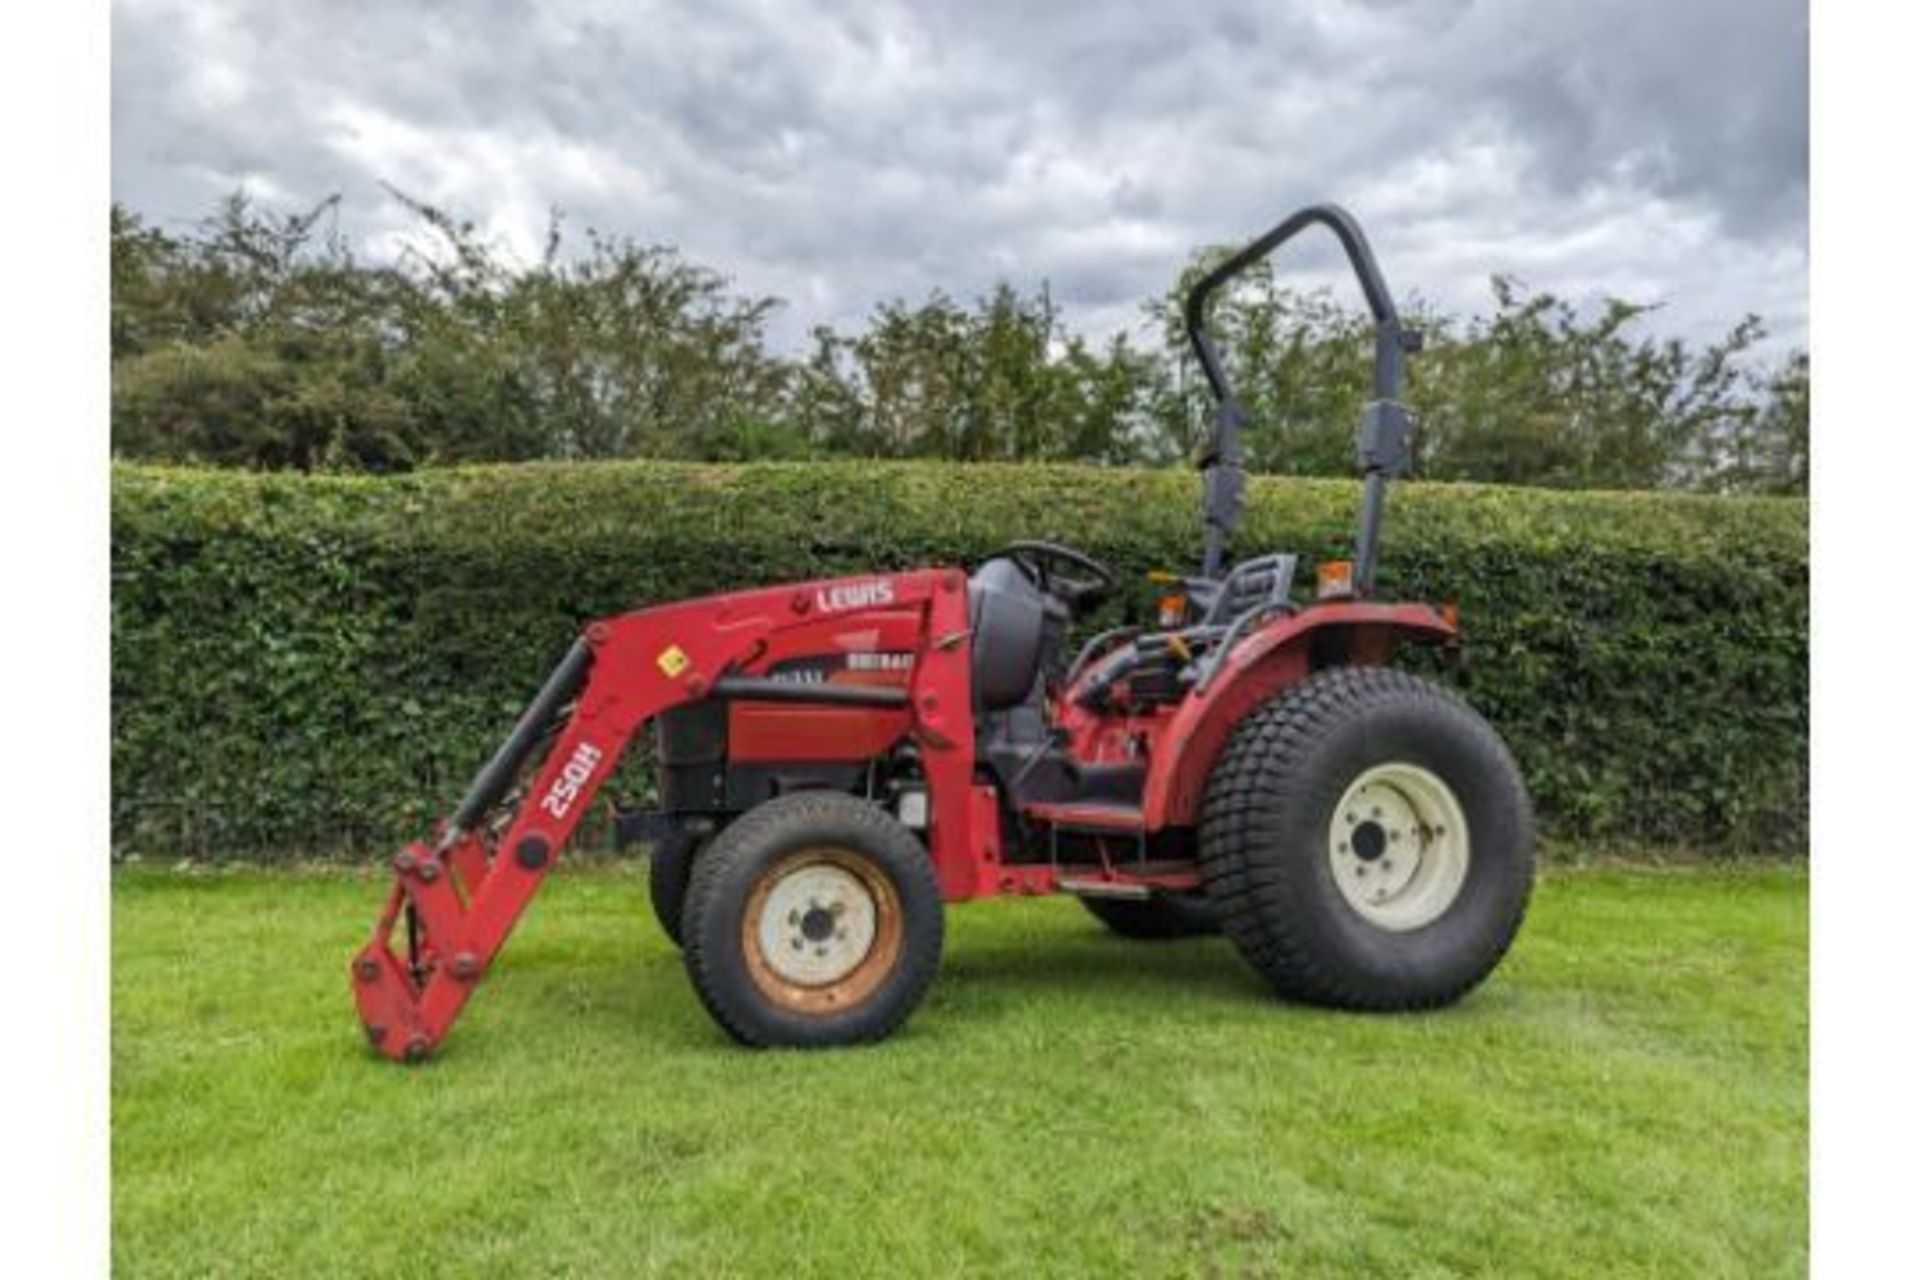 2013 Shibaura ST333 Compact Tractor With Lewis 25QH Loader Attachment 1848 Hours - Image 8 of 11